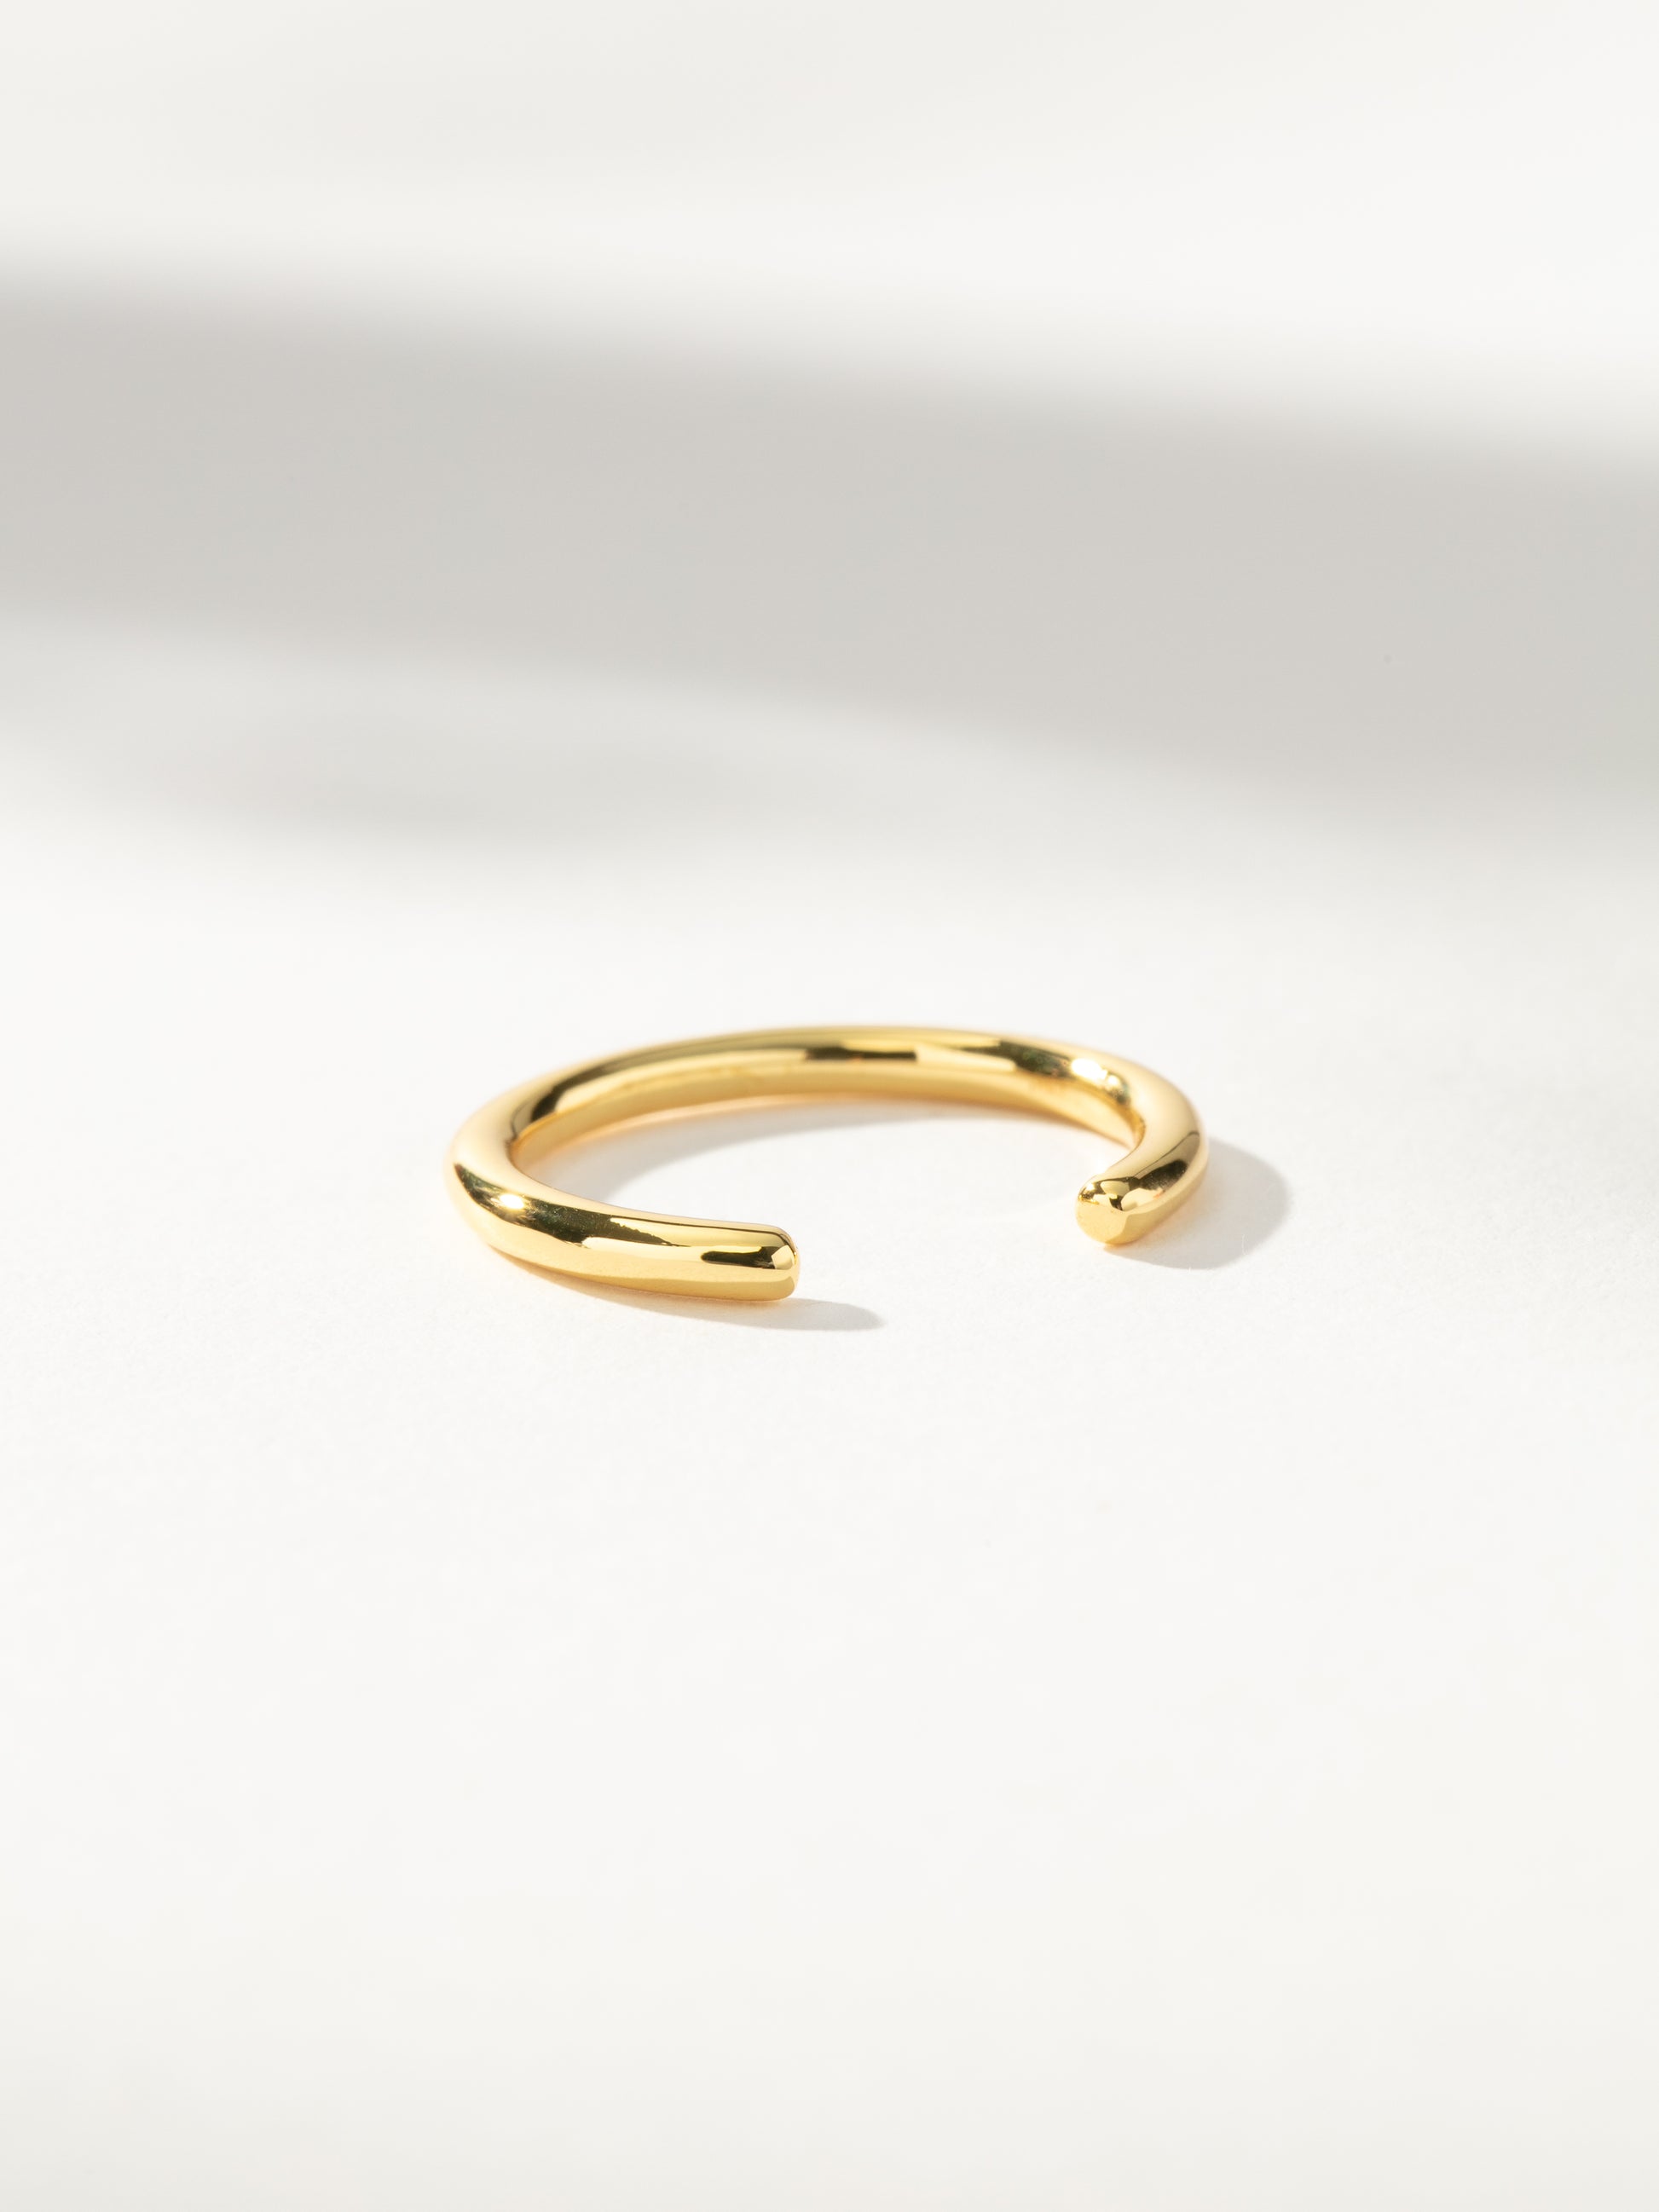 Glitch Ring | Gold | Product Image | Uncommon James